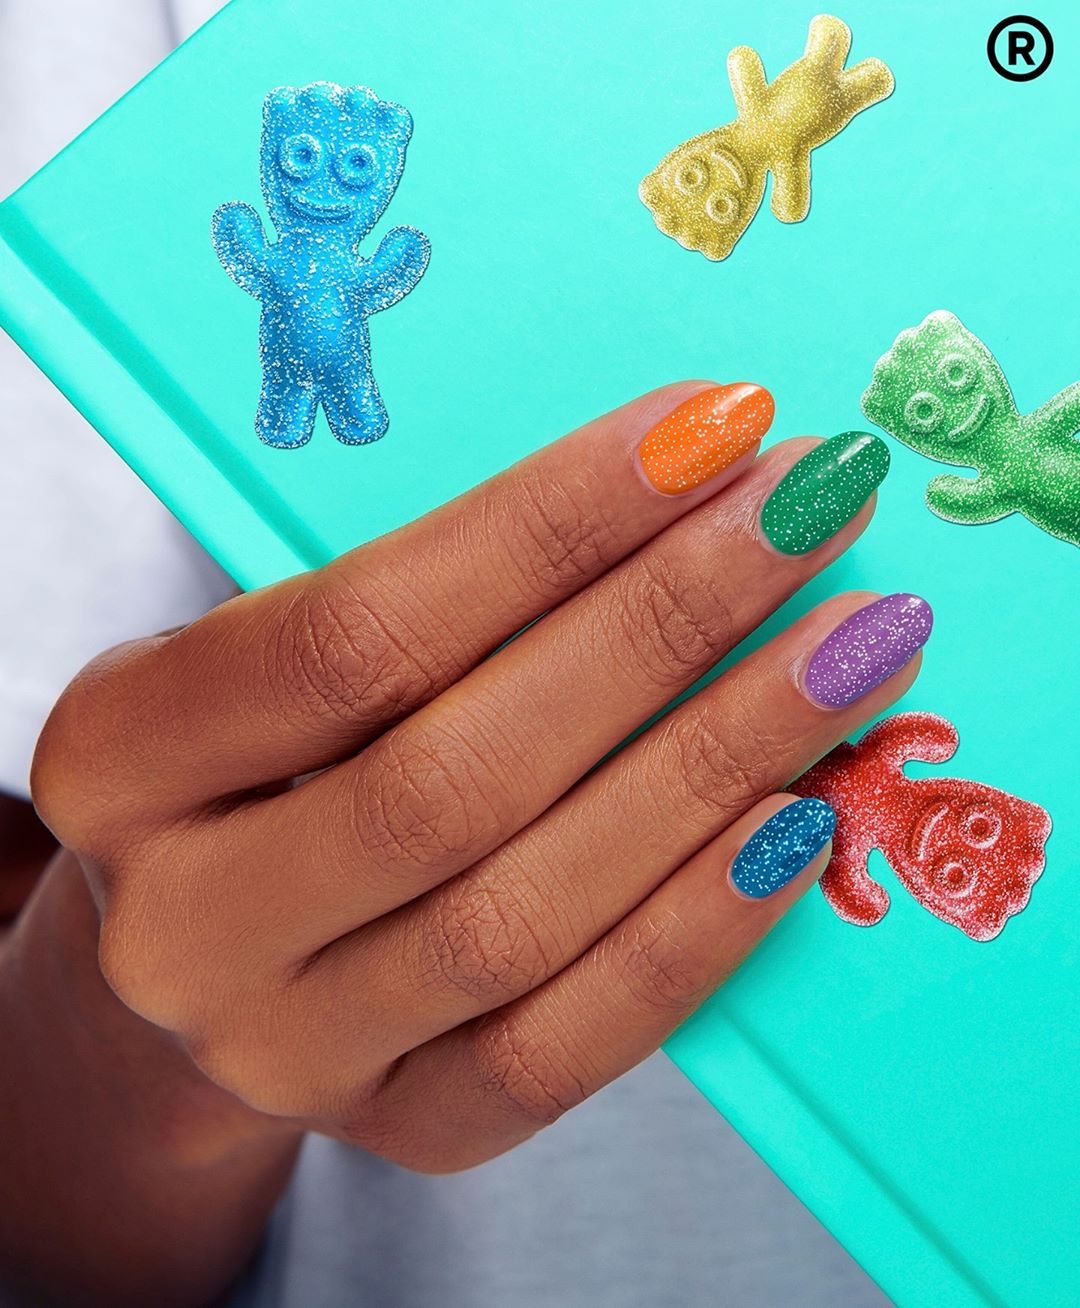 Sally Hansen - Ghouls just wanna have fun 💅. Get this party startled with our #SHxSourPatchKids collab. Tap the photo to shop!